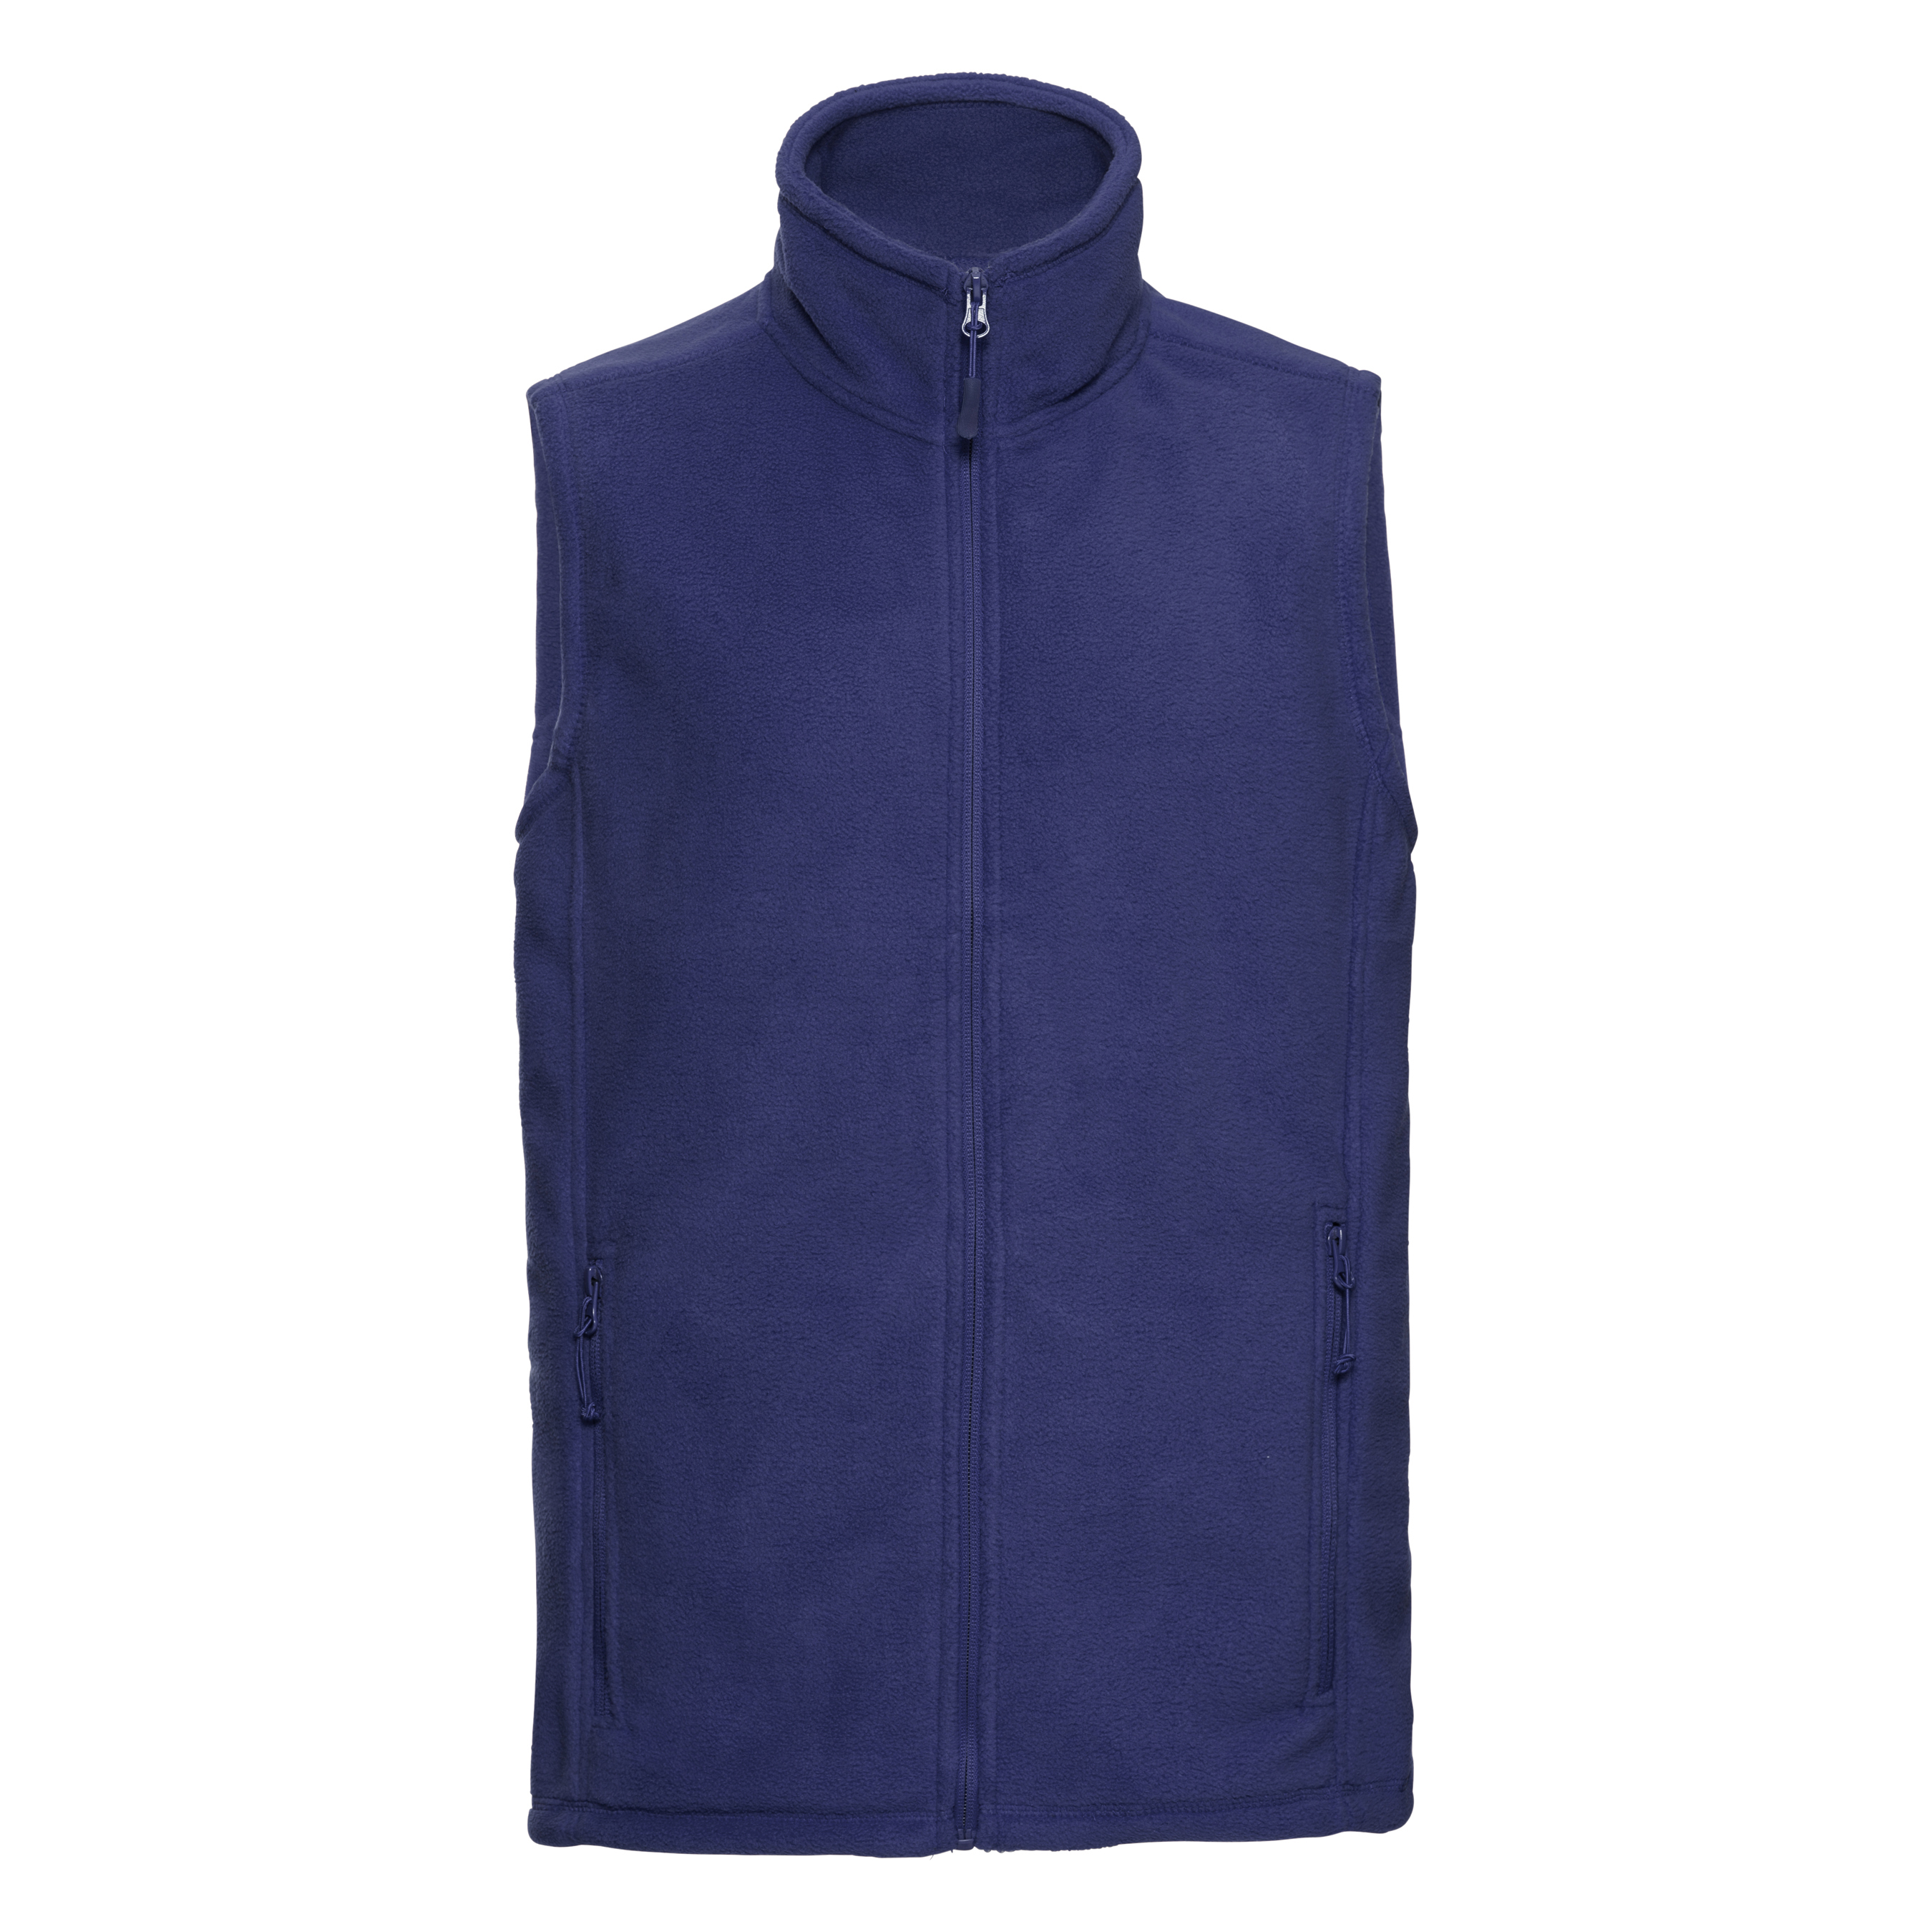 ax-httpswebsystems.s3.amazonaws.comtmp_for_downloadrussell-outdoor-fleece-gilet-bright-royal.jpeg